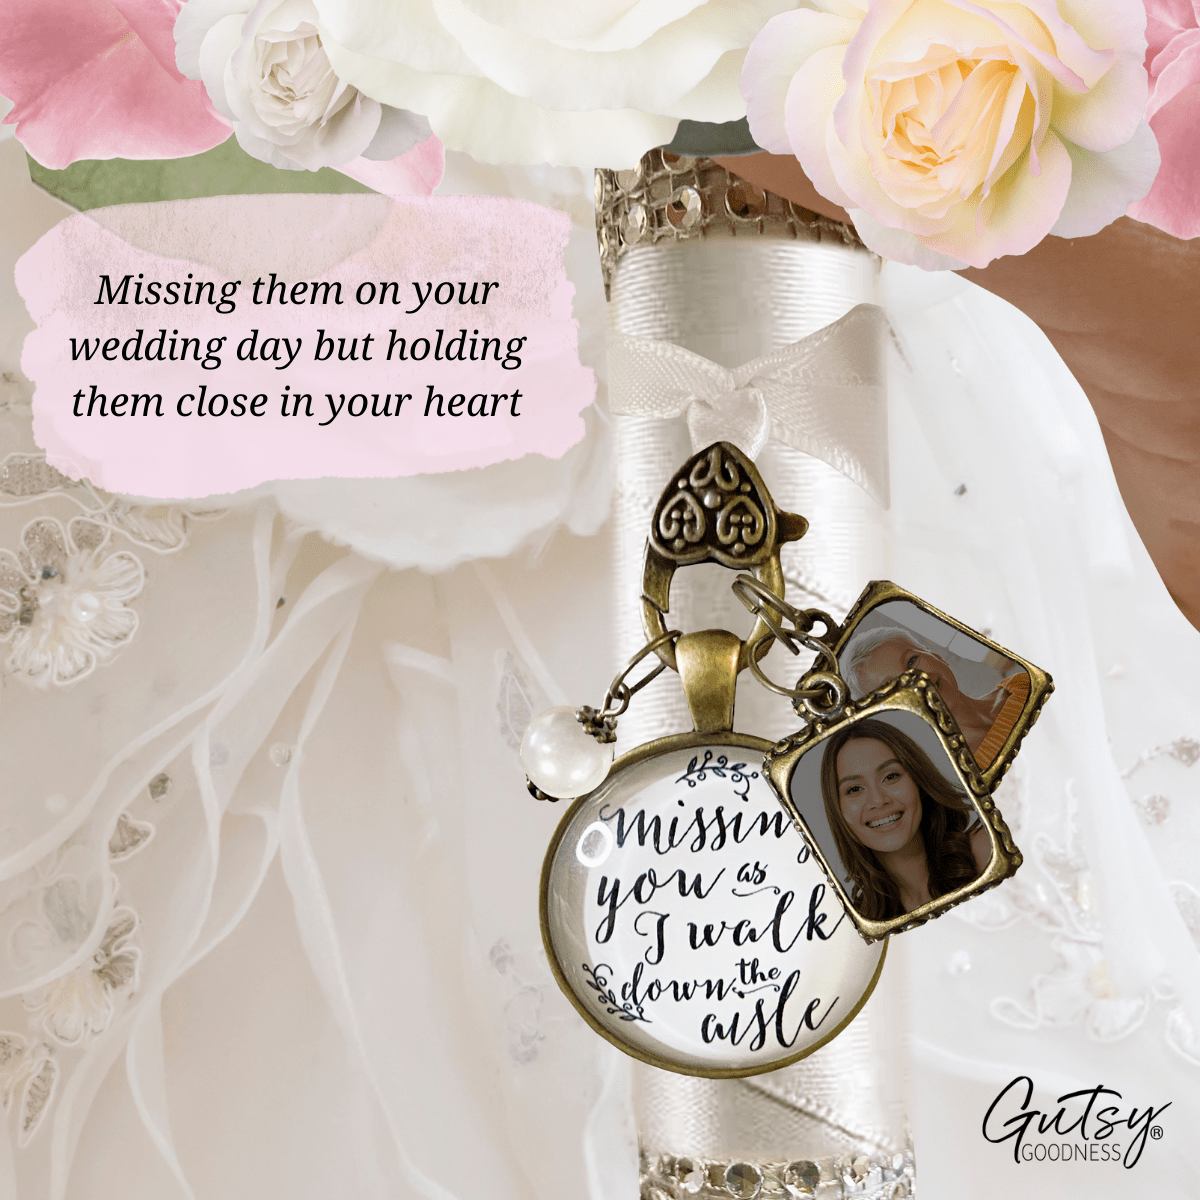 Bouquet Wedding Charm 2 Frames Missing You Memorial White Remembrance Photo Jewelry - Gutsy Goodness Handmade Jewelry Gifts